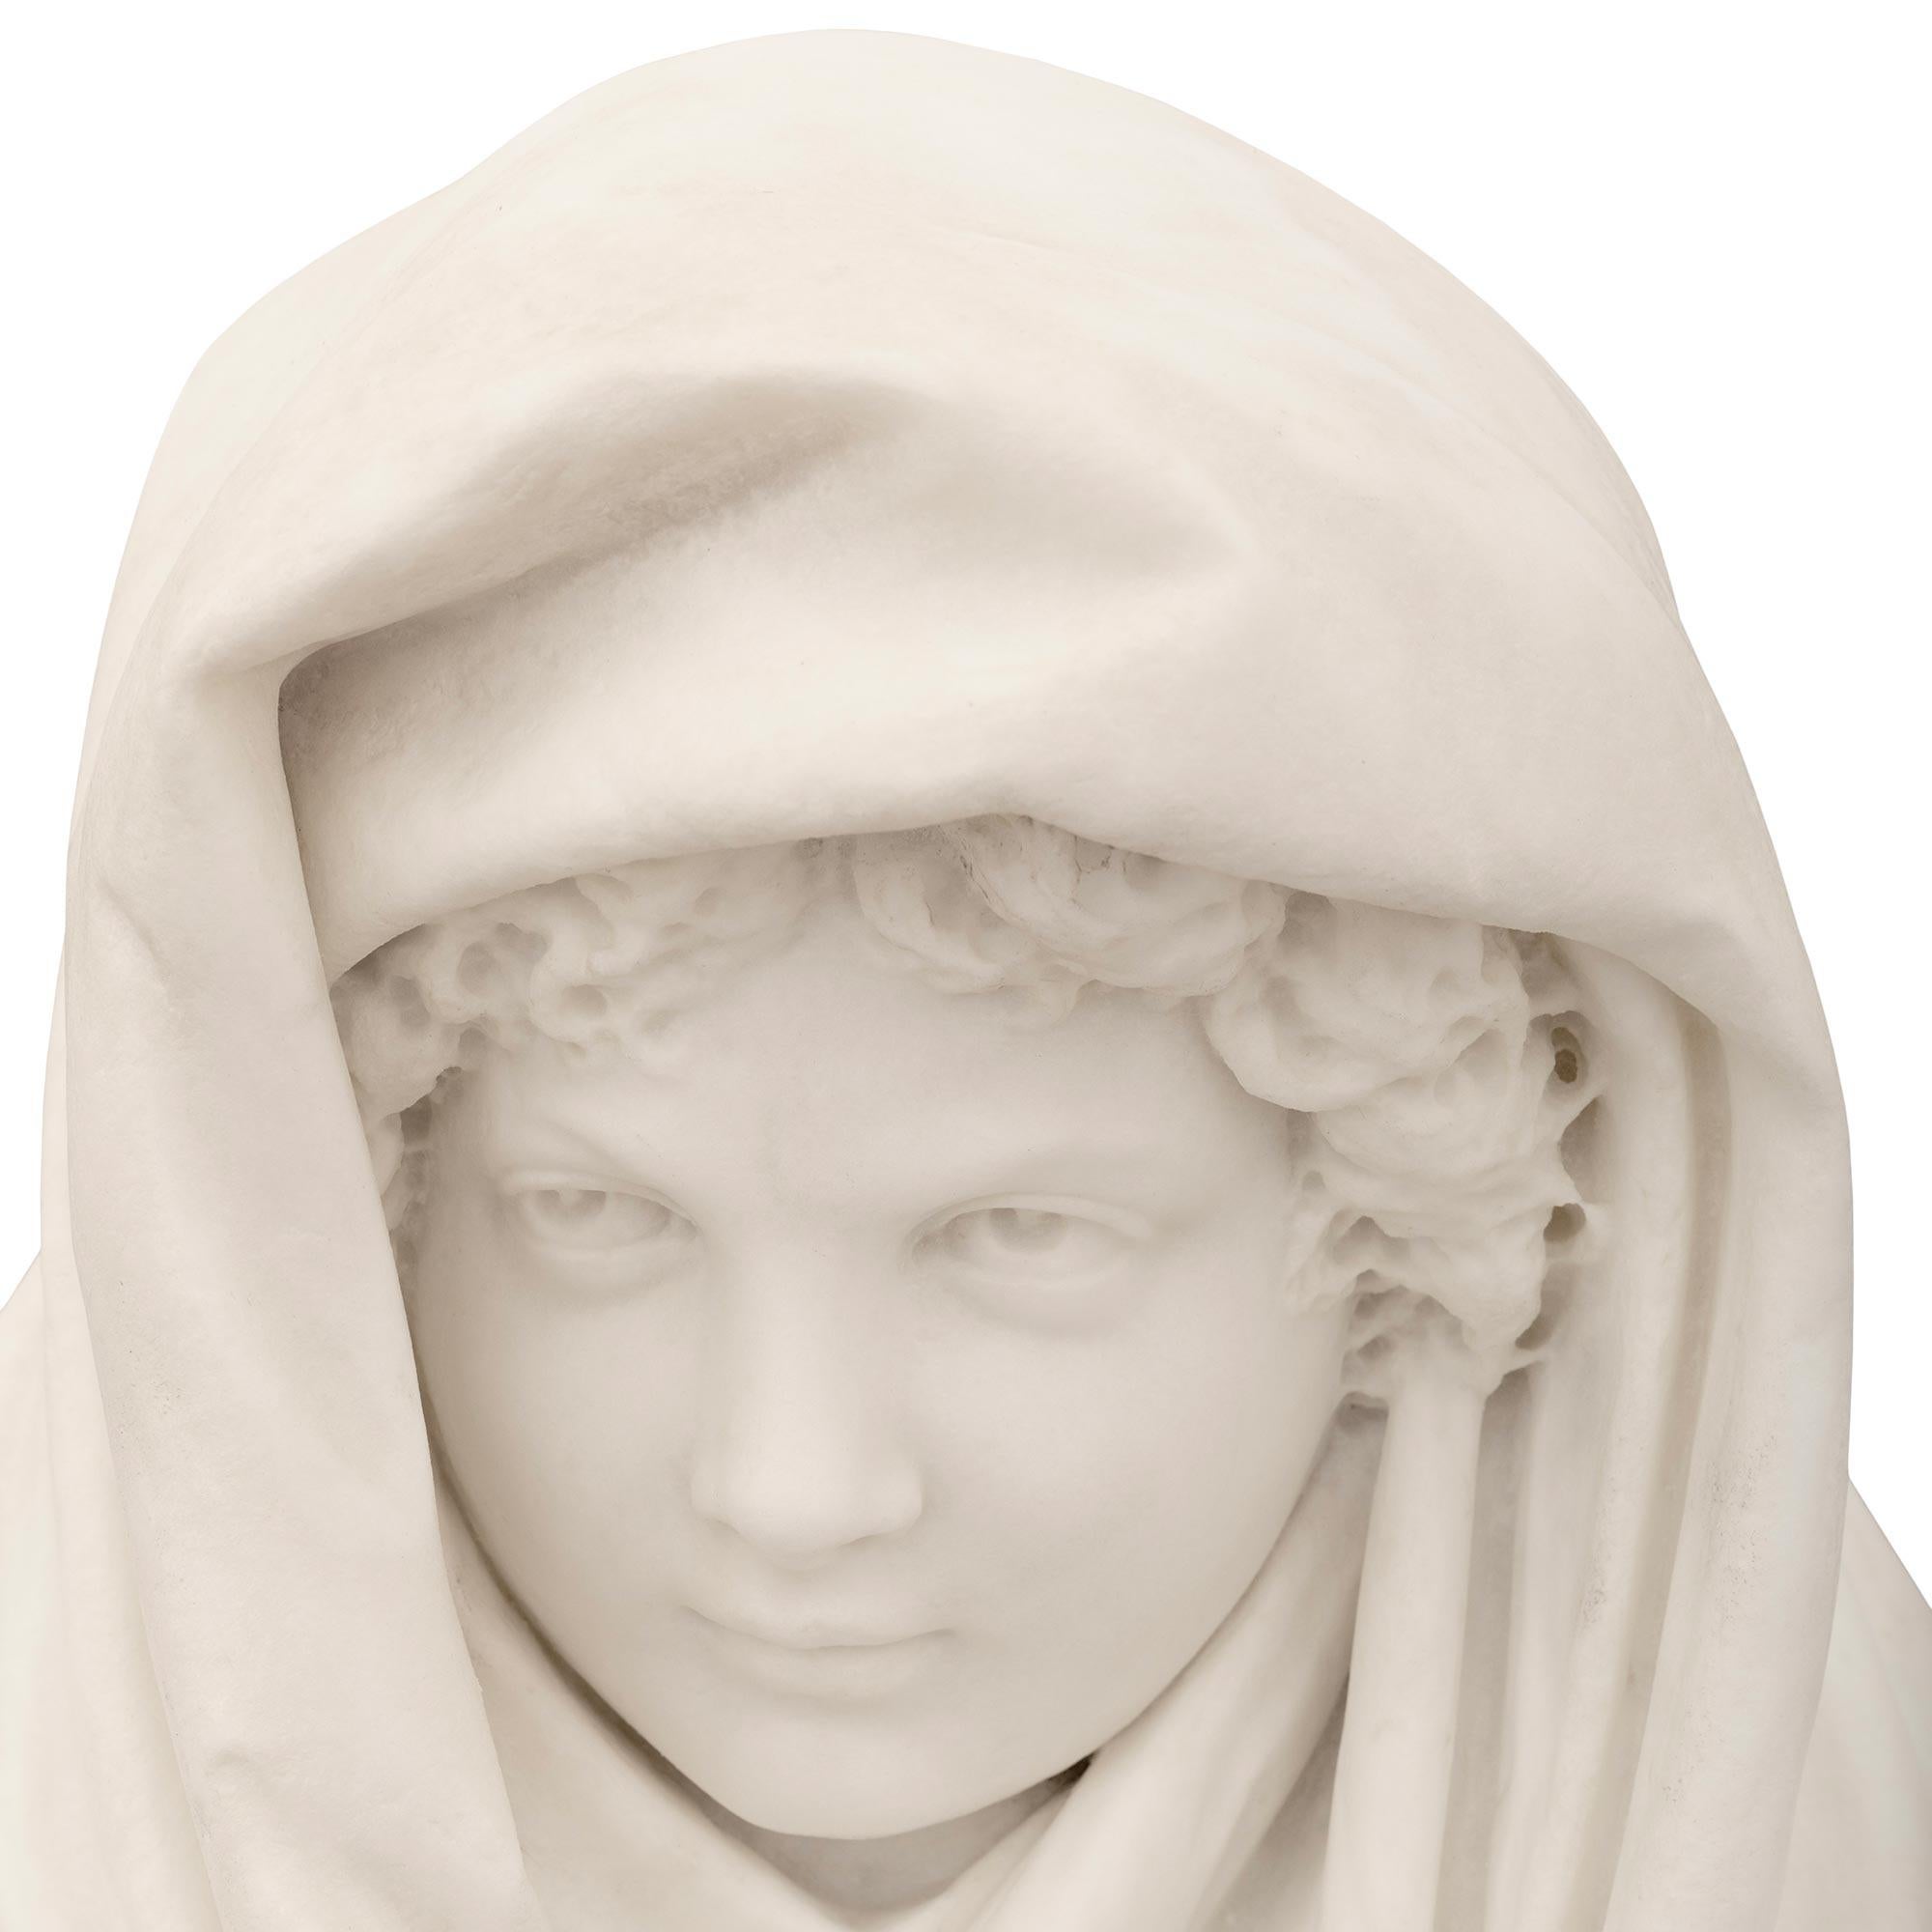 A finely executed and large scaled Italian 19th century white Carrara Marble sculpture of a young boy in a shawl. The boy is draped in a flowing oversized shawl which wraps around his shoulders and over his head. His exquisite facial expression and